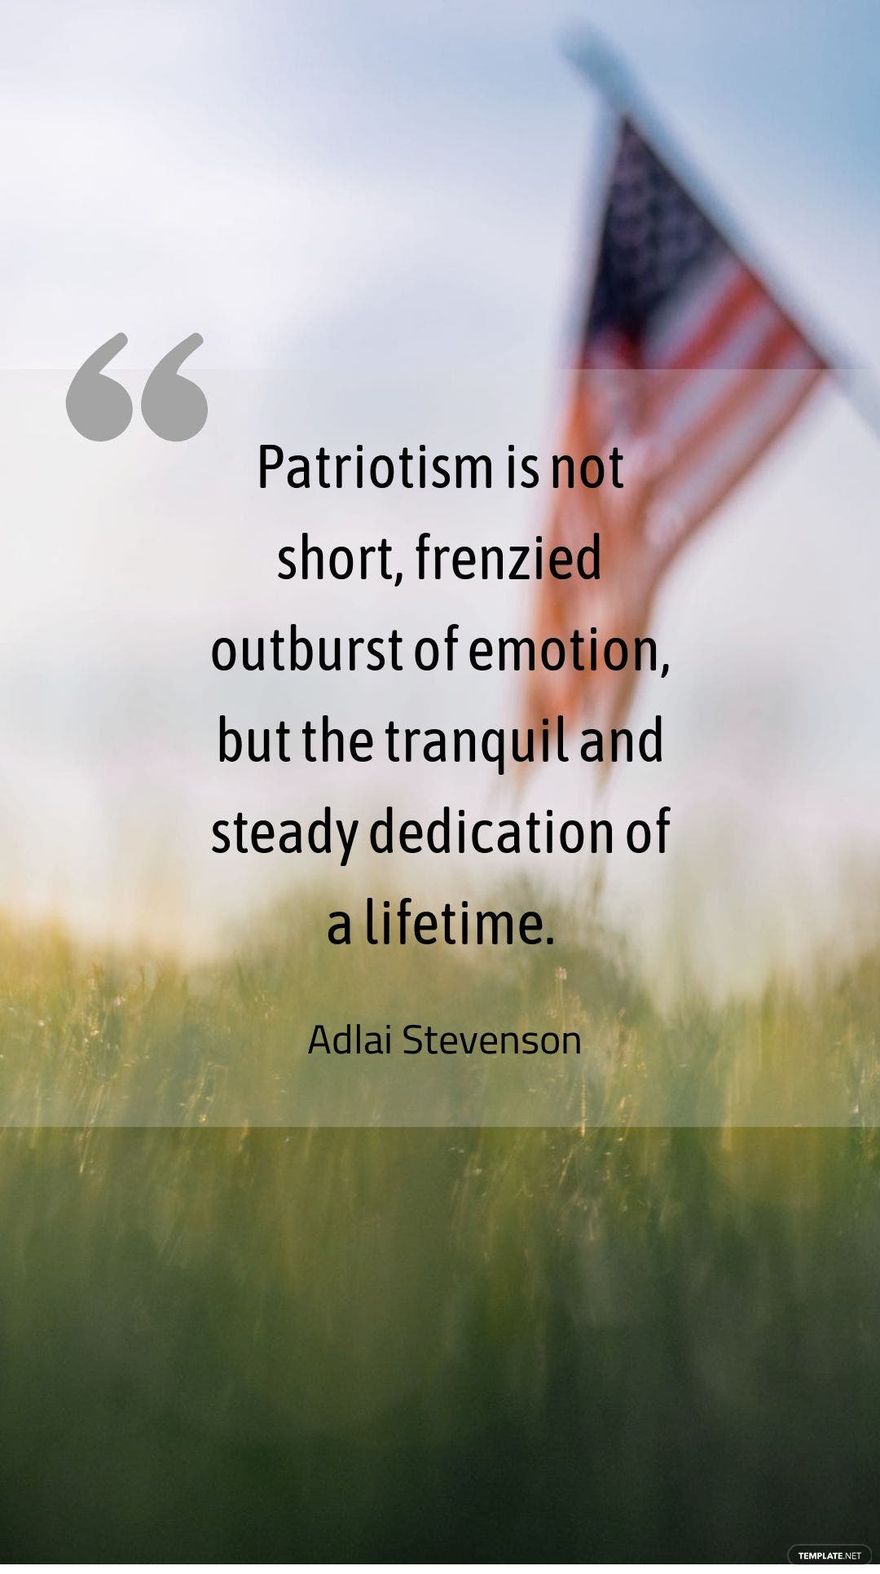 Adlai Stevenson - Patriotism is not short, frenzied outburst of emotion, but the tranquil and steady dedication of a lifetime.